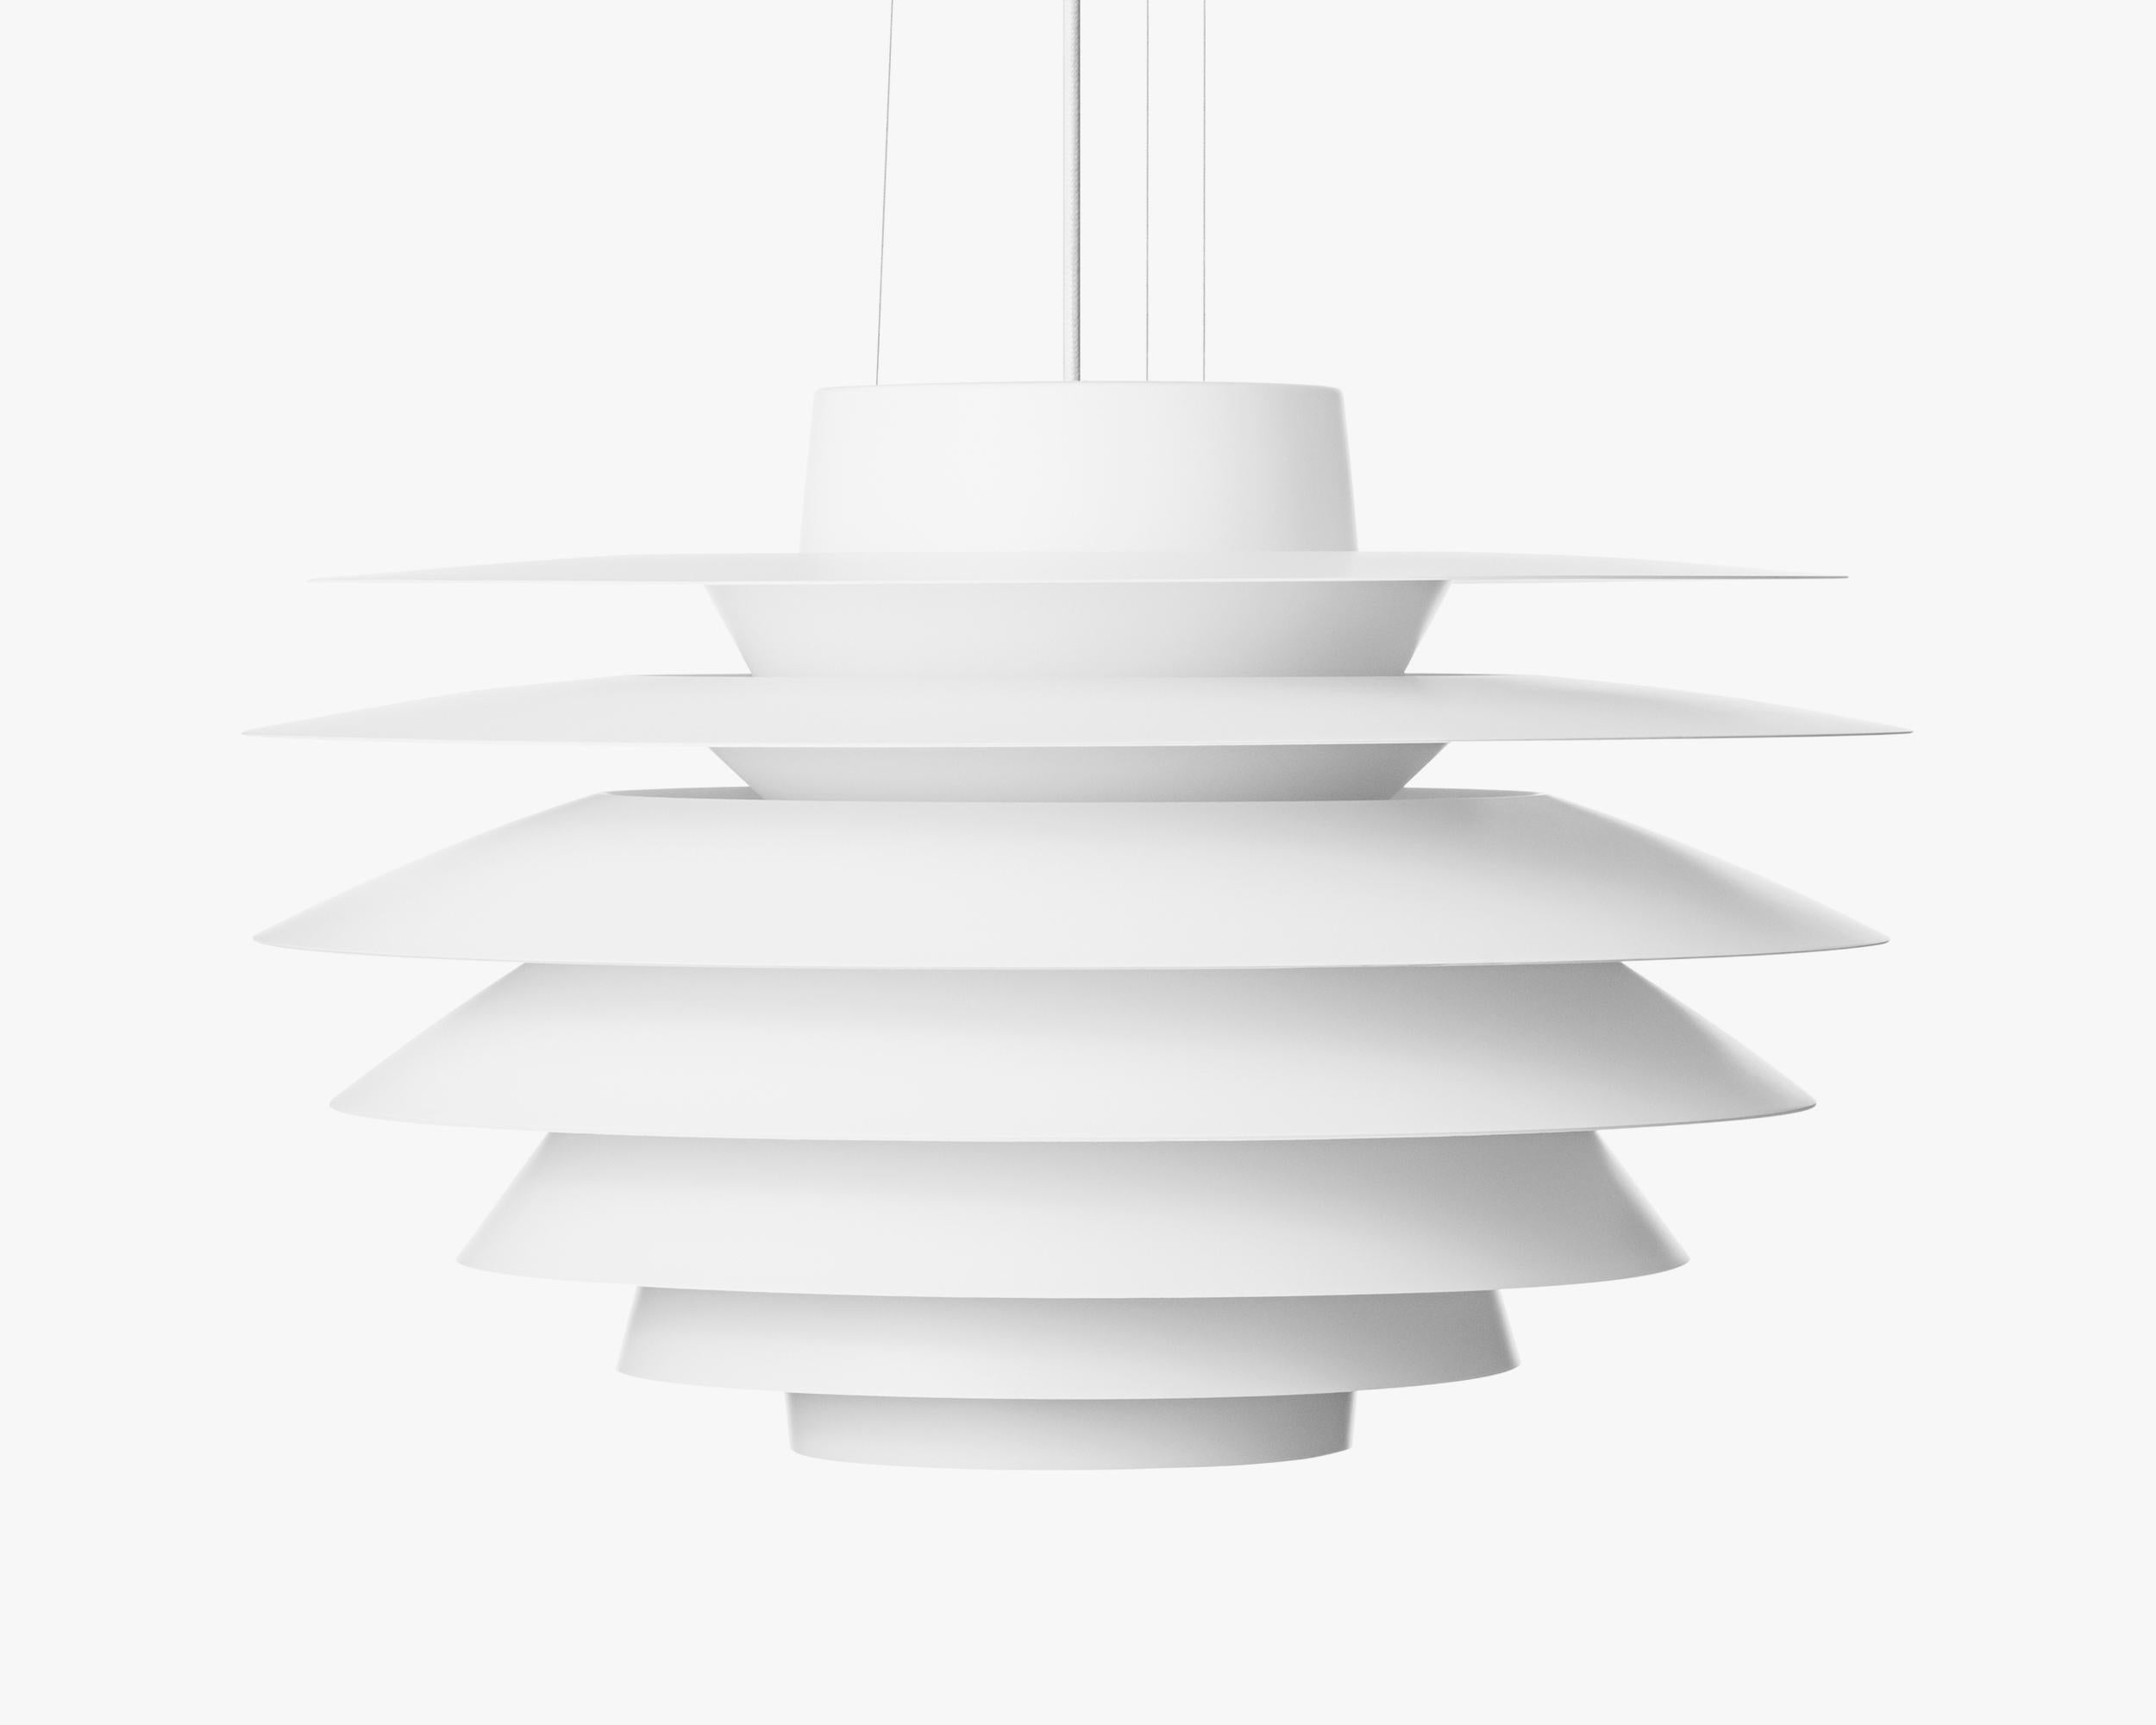 Pendant lamp Verona signed by Sven Middelboe for LYFA.
Official new edition

Textile wire (white) 300cm
Bulb: G9/E14/27 max 40/60W (110V-230V)

Matt printed aluminum

Sizes available:
D 175 mm – H 125 mm
D 250 mm – H 174 mm
D 320 mm – H